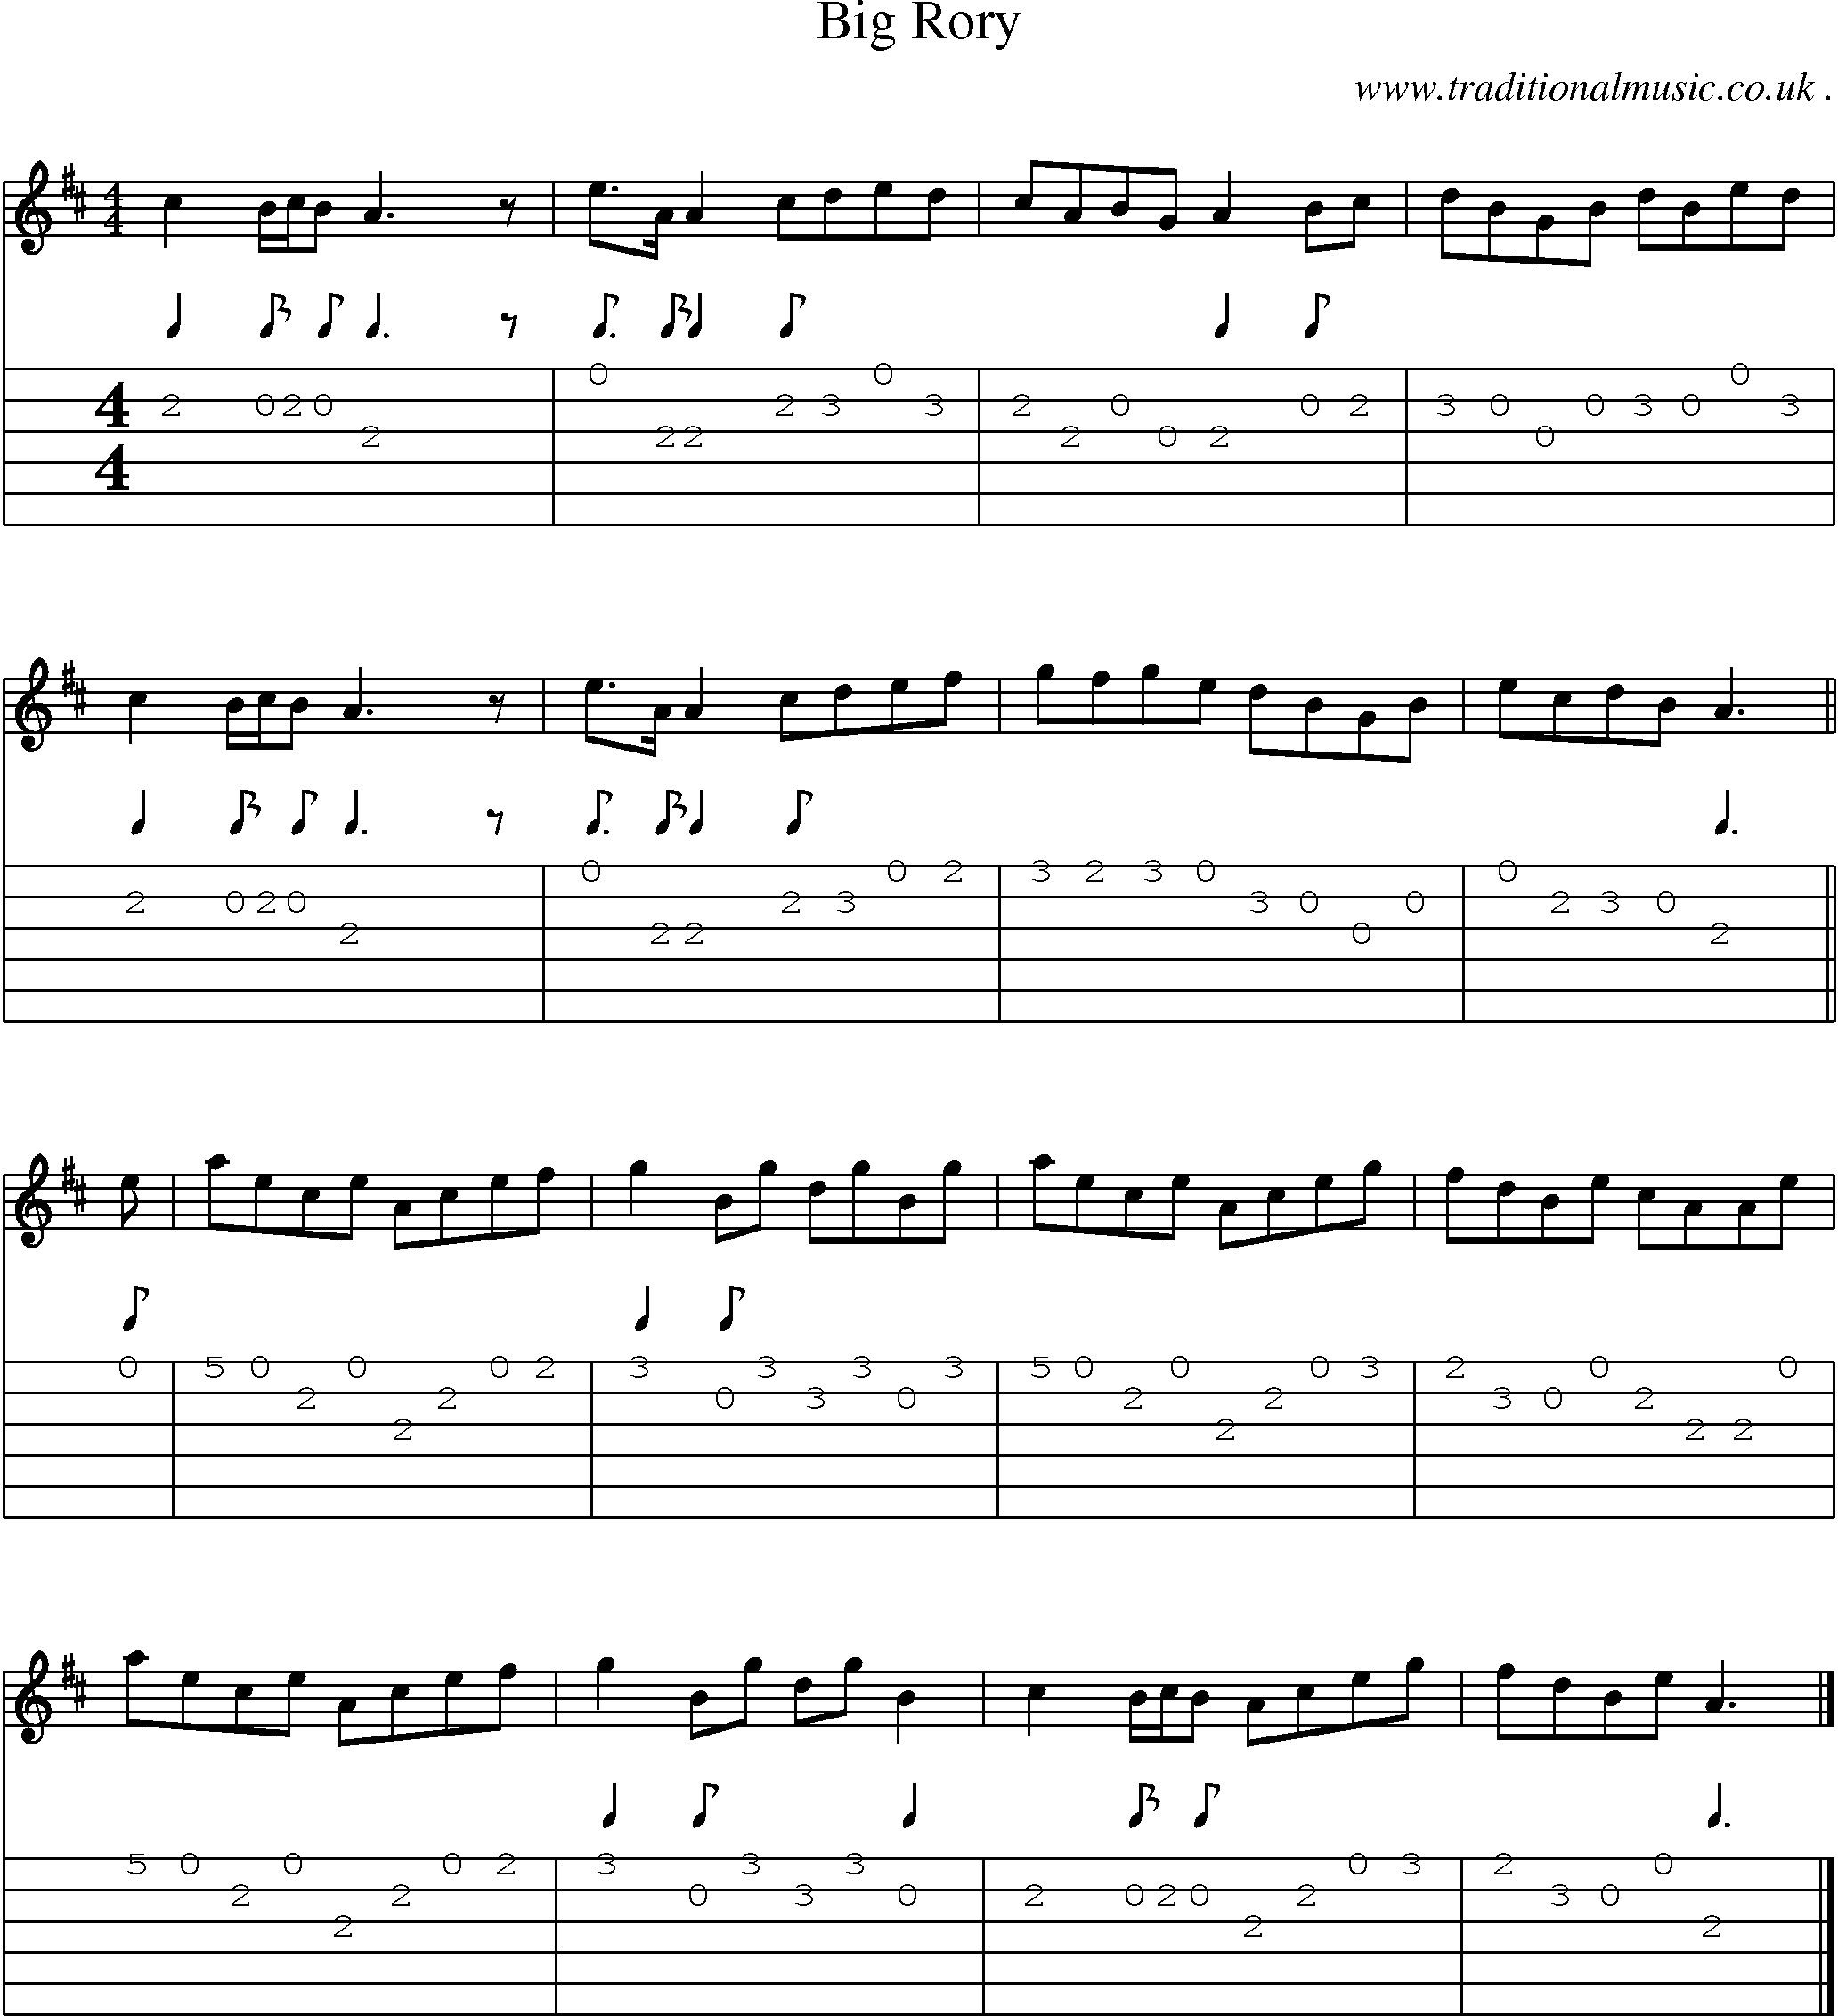 Sheet-music  score, Chords and Guitar Tabs for Big Rory